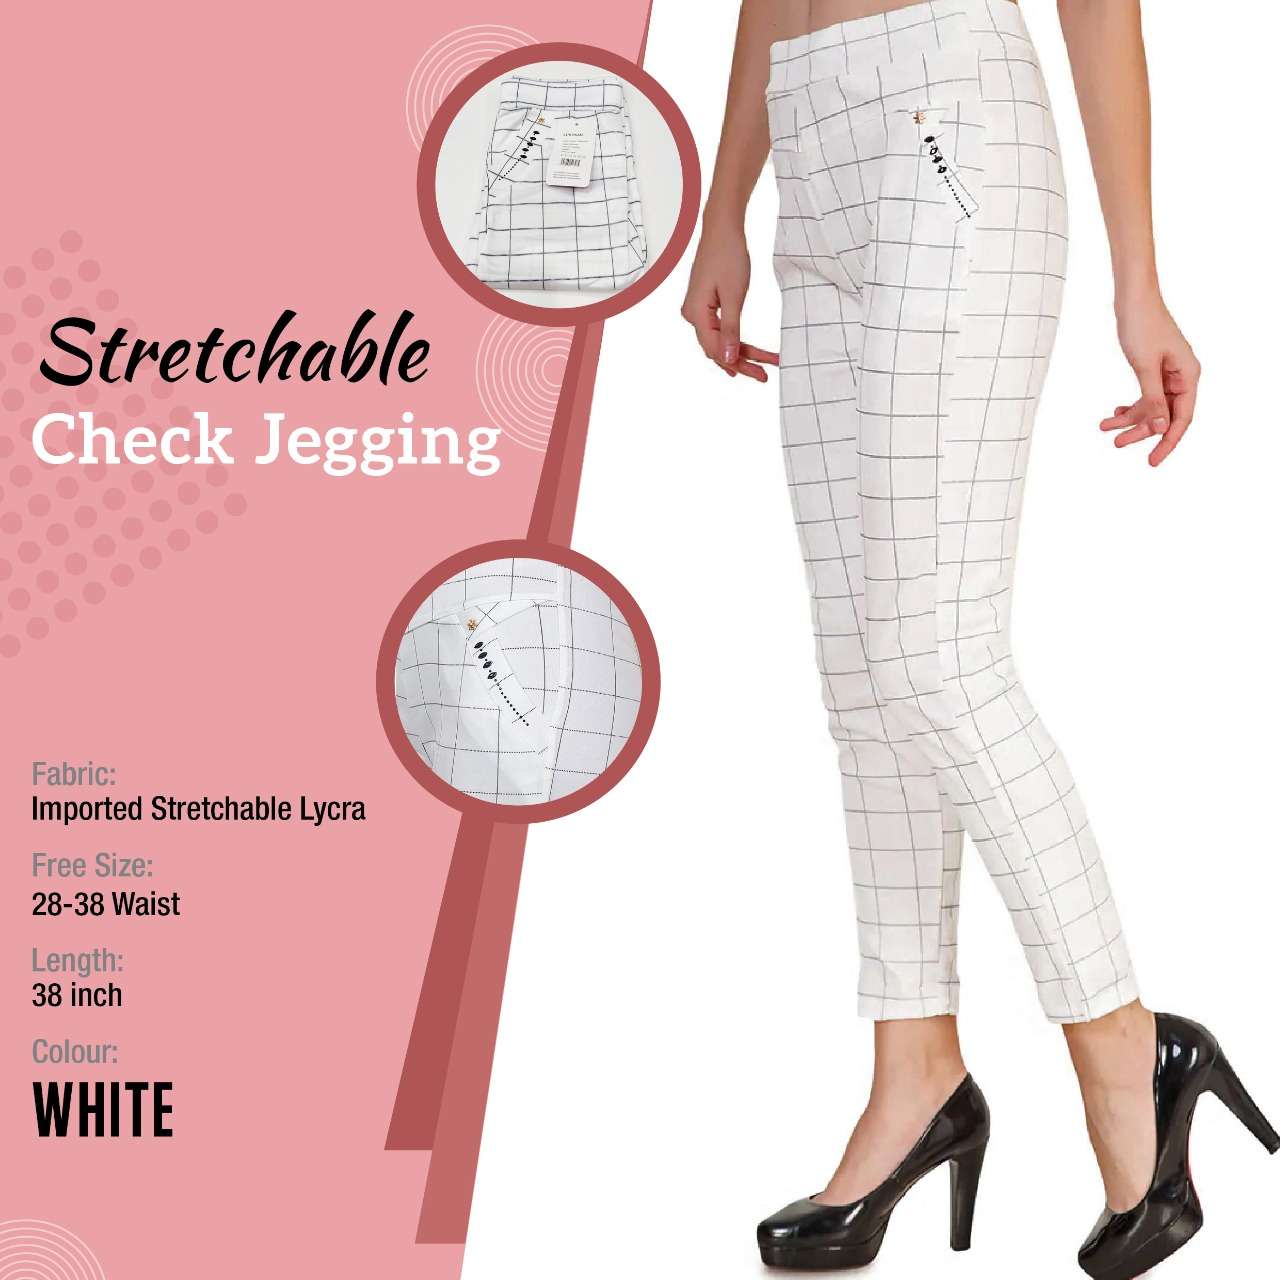 Stretchable Checks Jegging Bottom Wear Ladies Collection